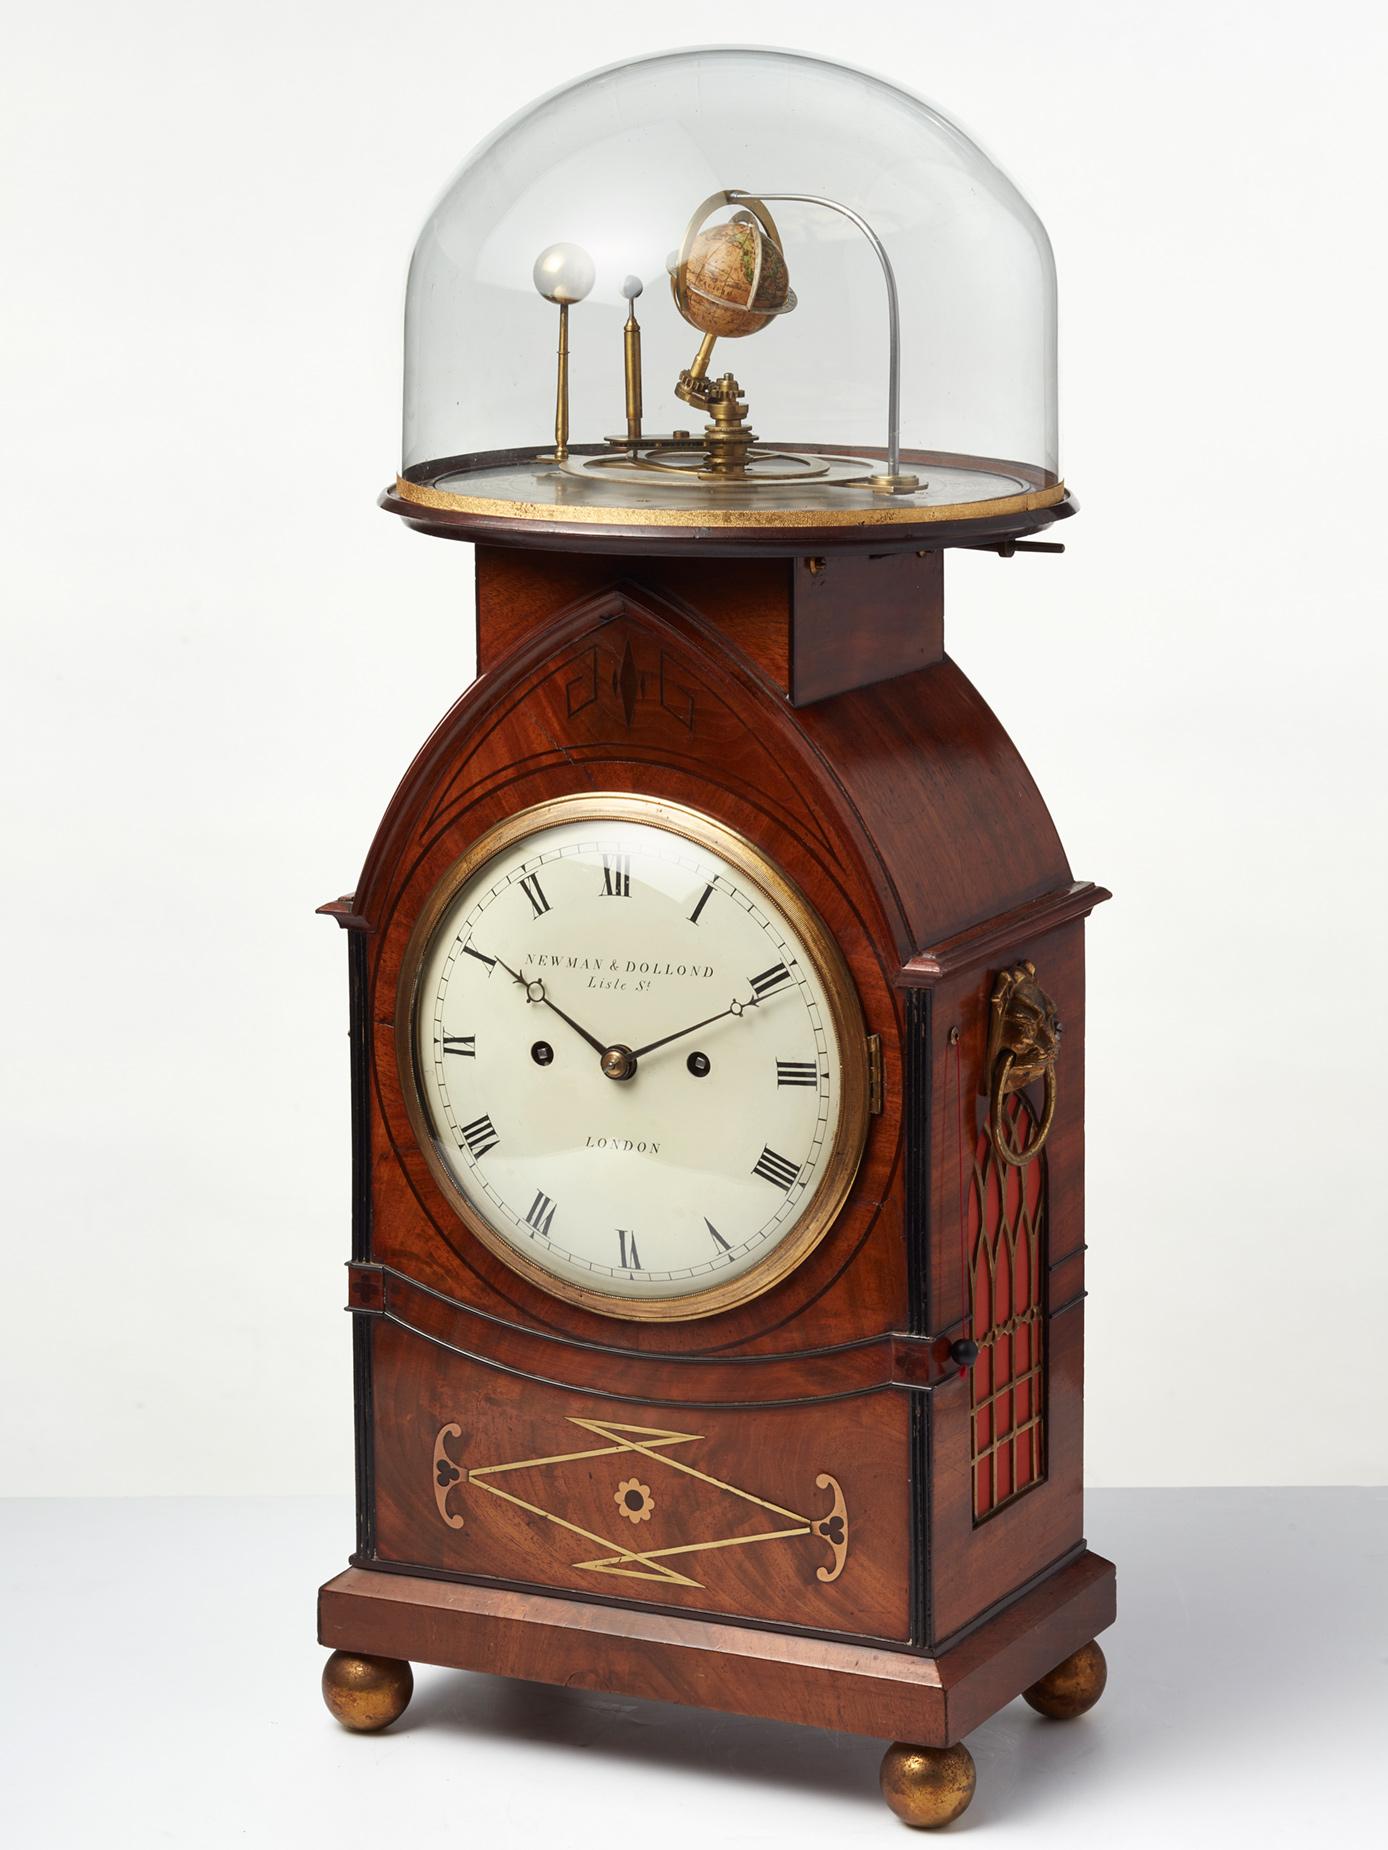 The beautiful Regency mahogany brass inlaid case on ball feet and on top the orrery connected to the movement. On the side, two bronze cast lion heads to handle the clock. On the right hand side, a pull repeat option. 

The eight day ‘on-bell’